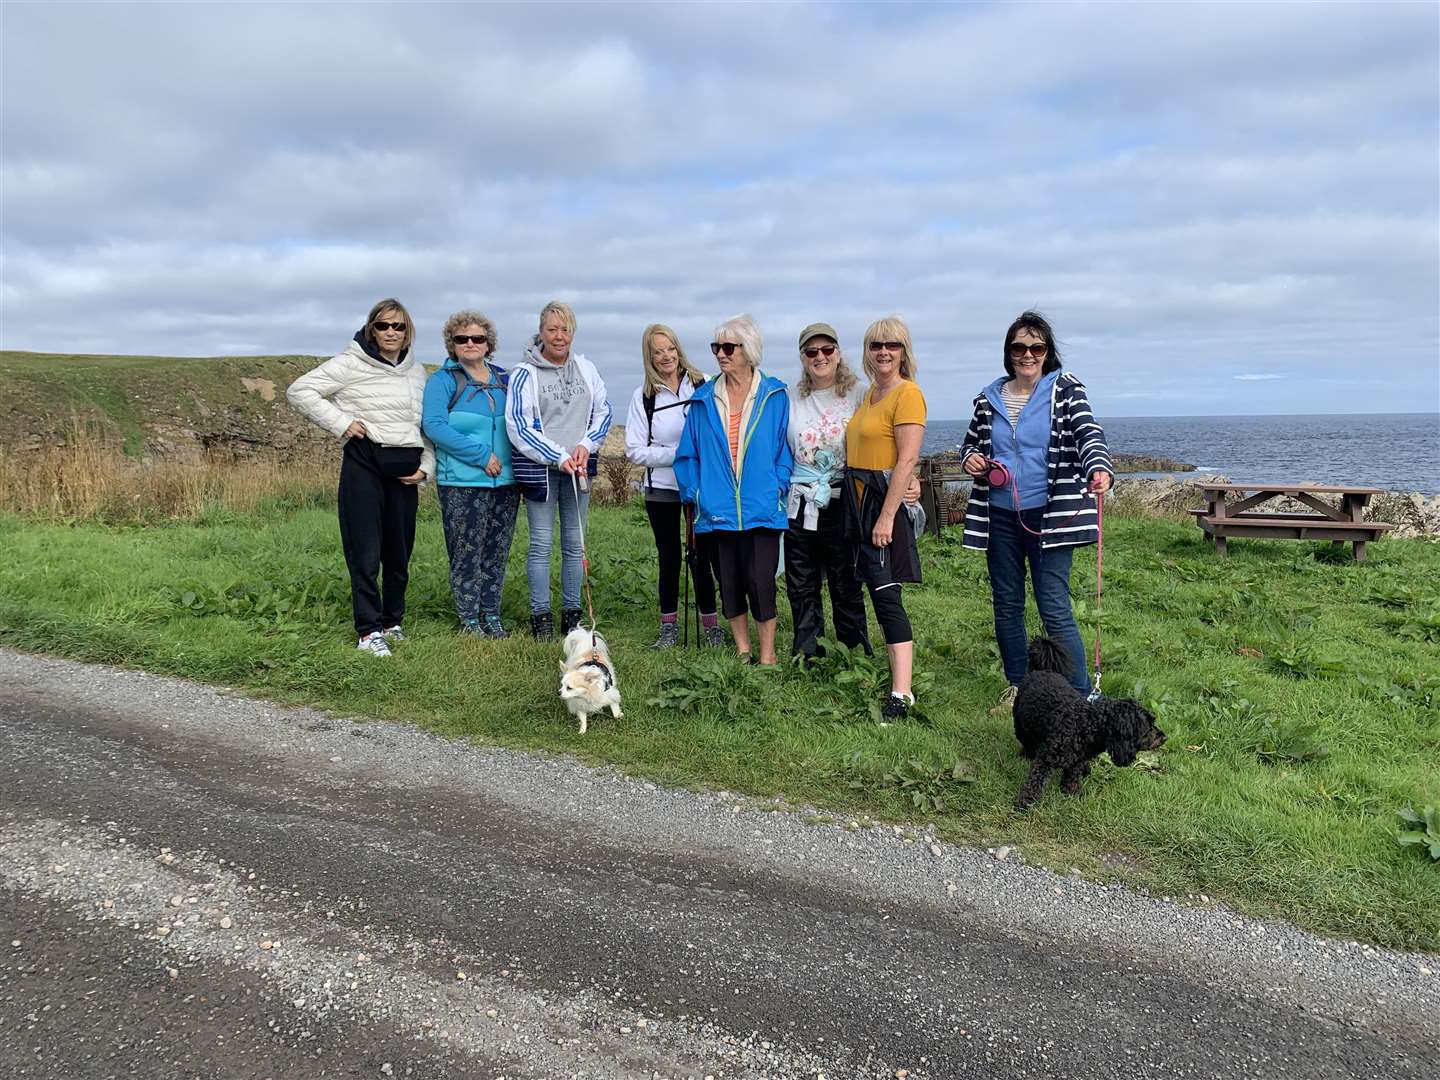 Members of Portskerra Activ' Club walking group during a previous outing.